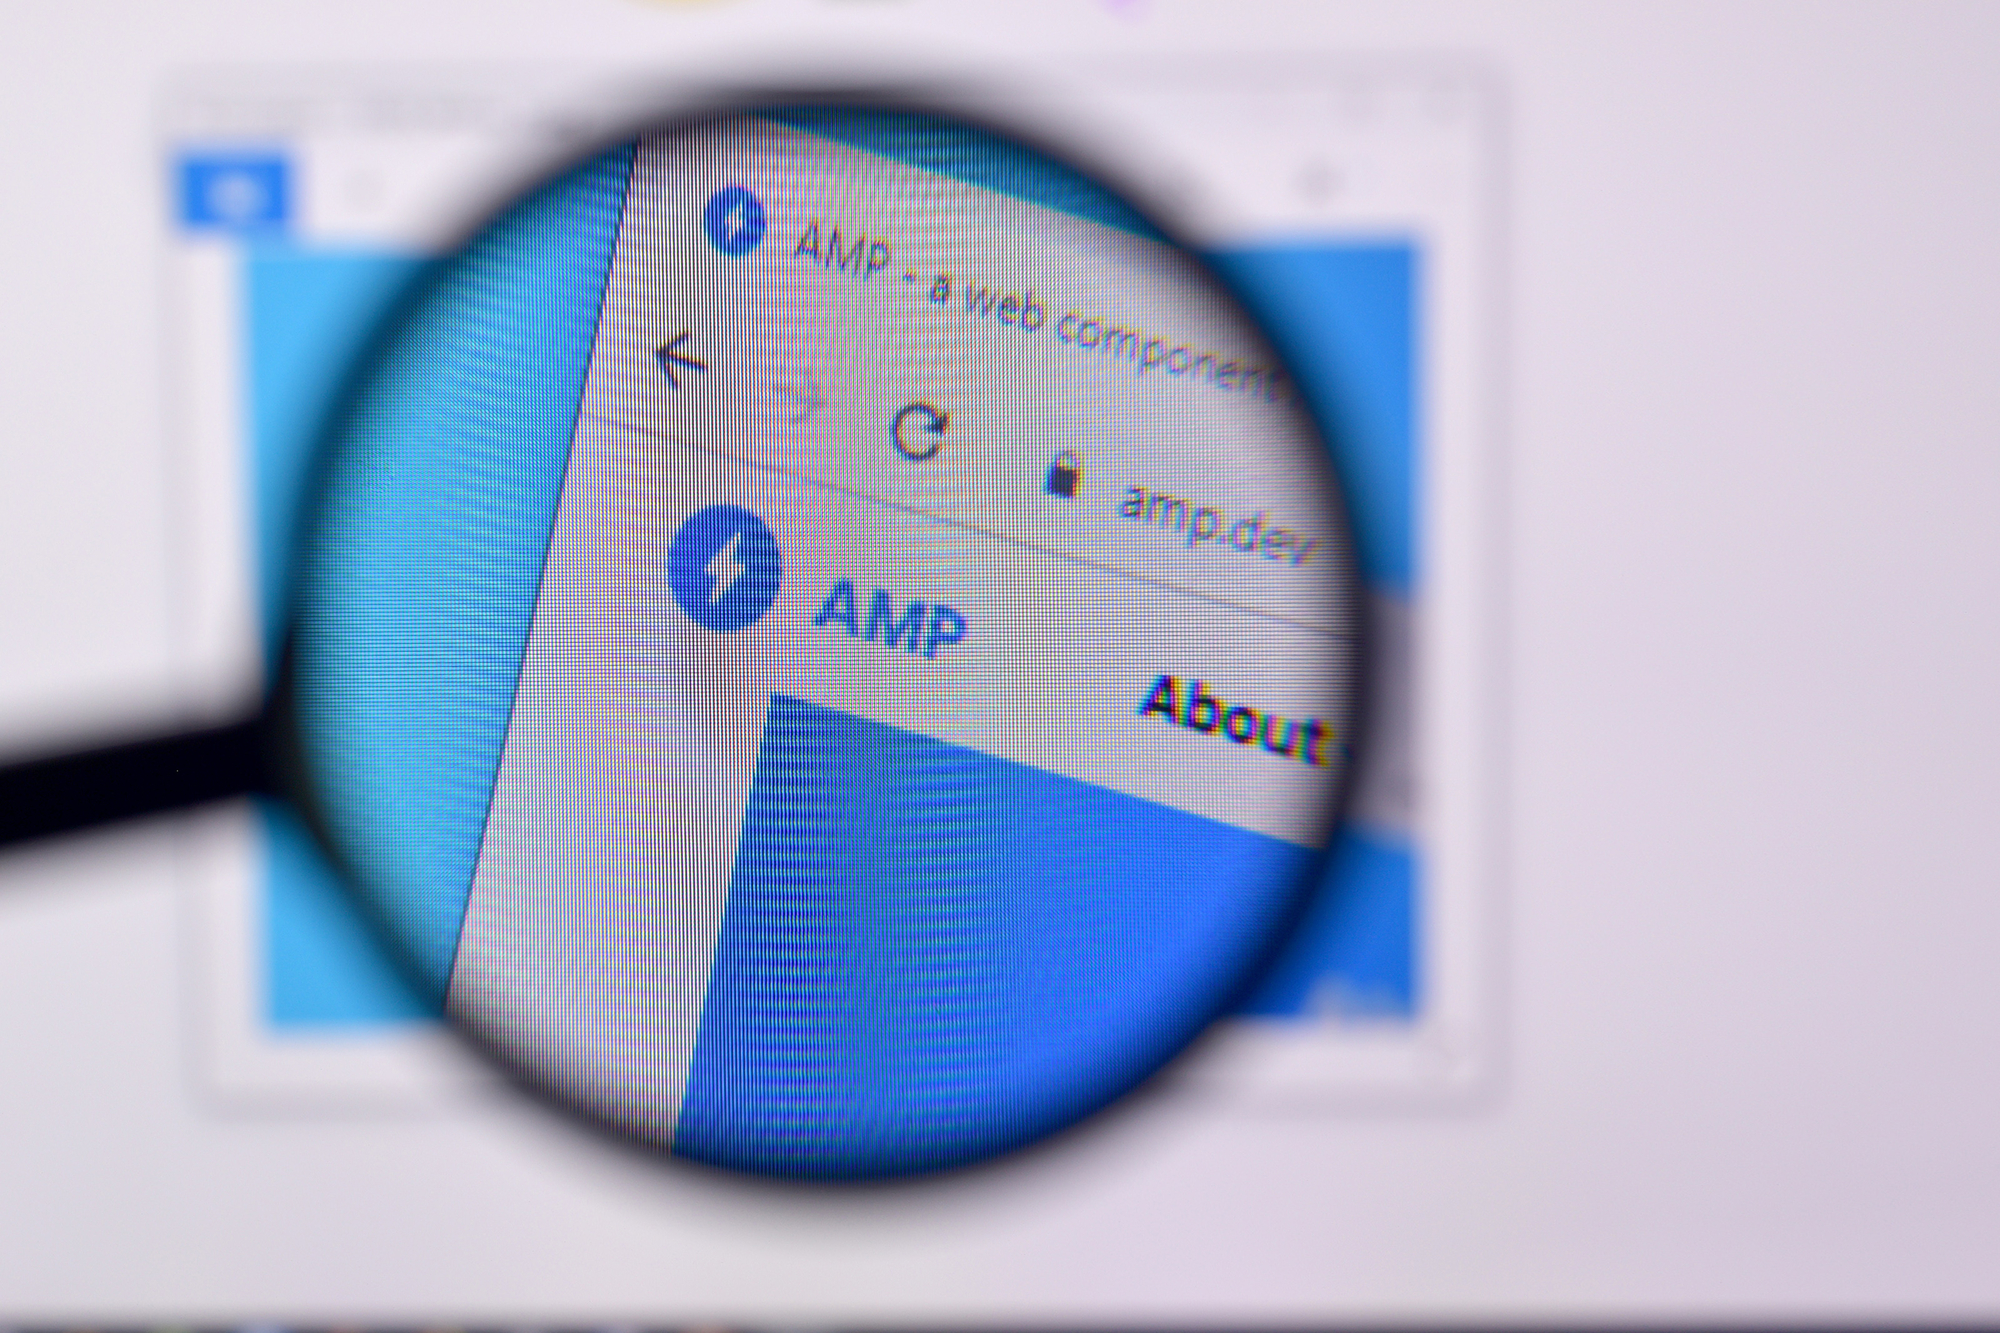 The AMP (Accelerated Mobile Pages) logo